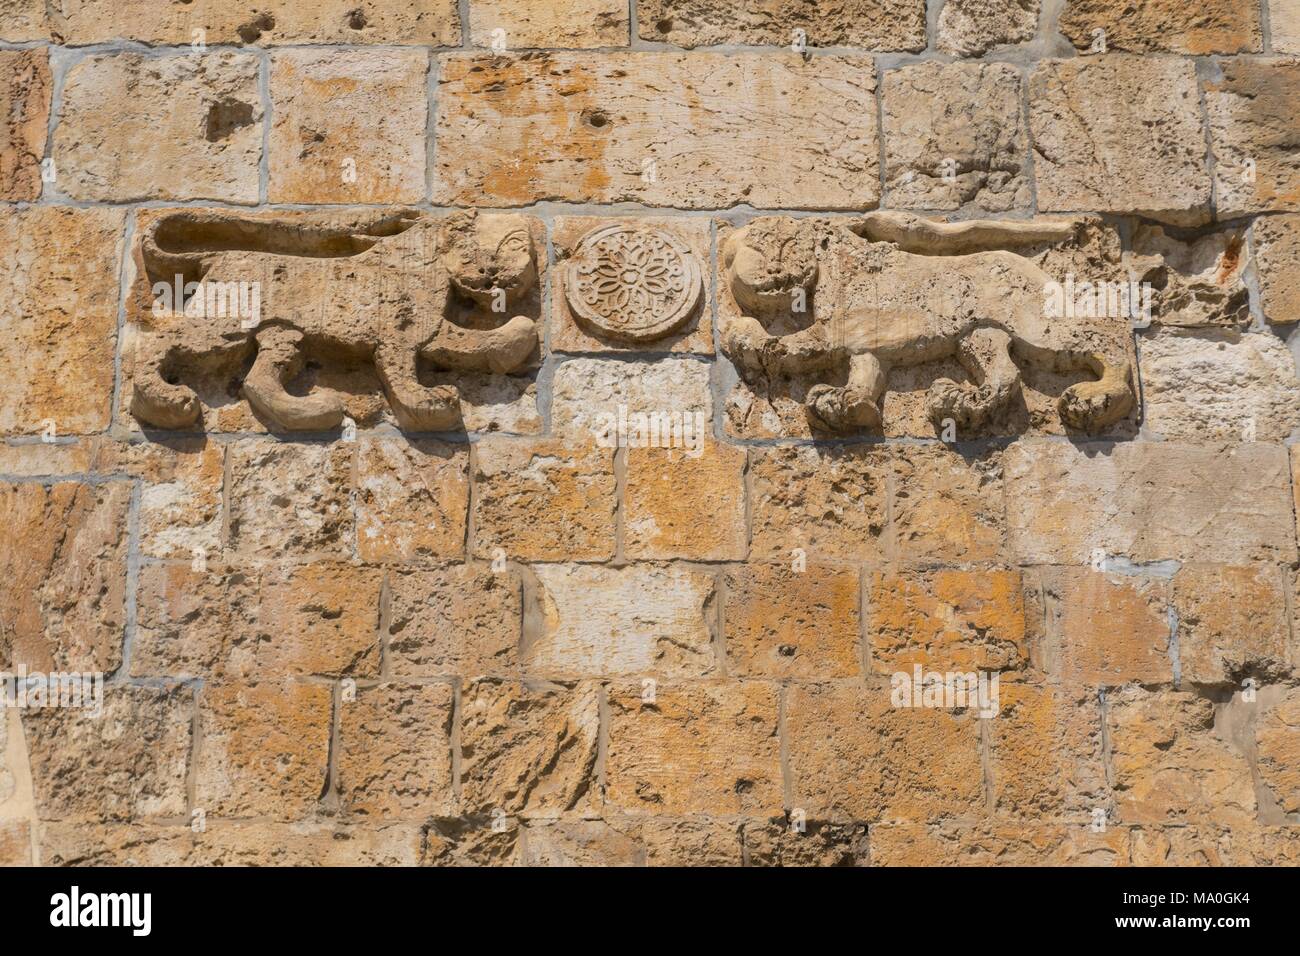 Relief on the Lions Gate, entrance to the Muslim quarter of the Old City in Jerusalem, Israel. Stock Photo